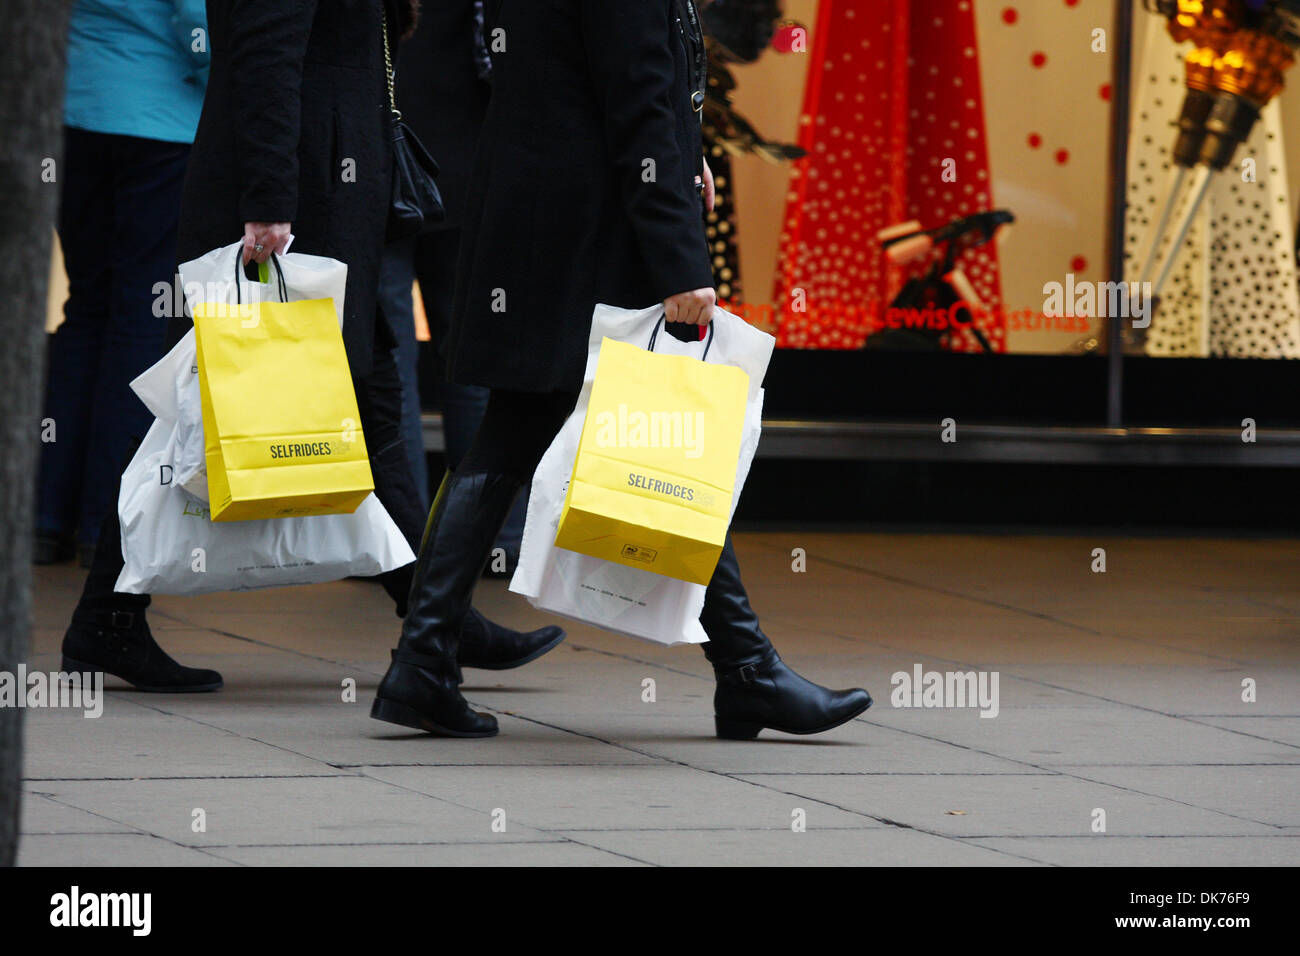 Part of two people carrying Selfridges and other shopping bags along Oxford Street in London England Stock Photo